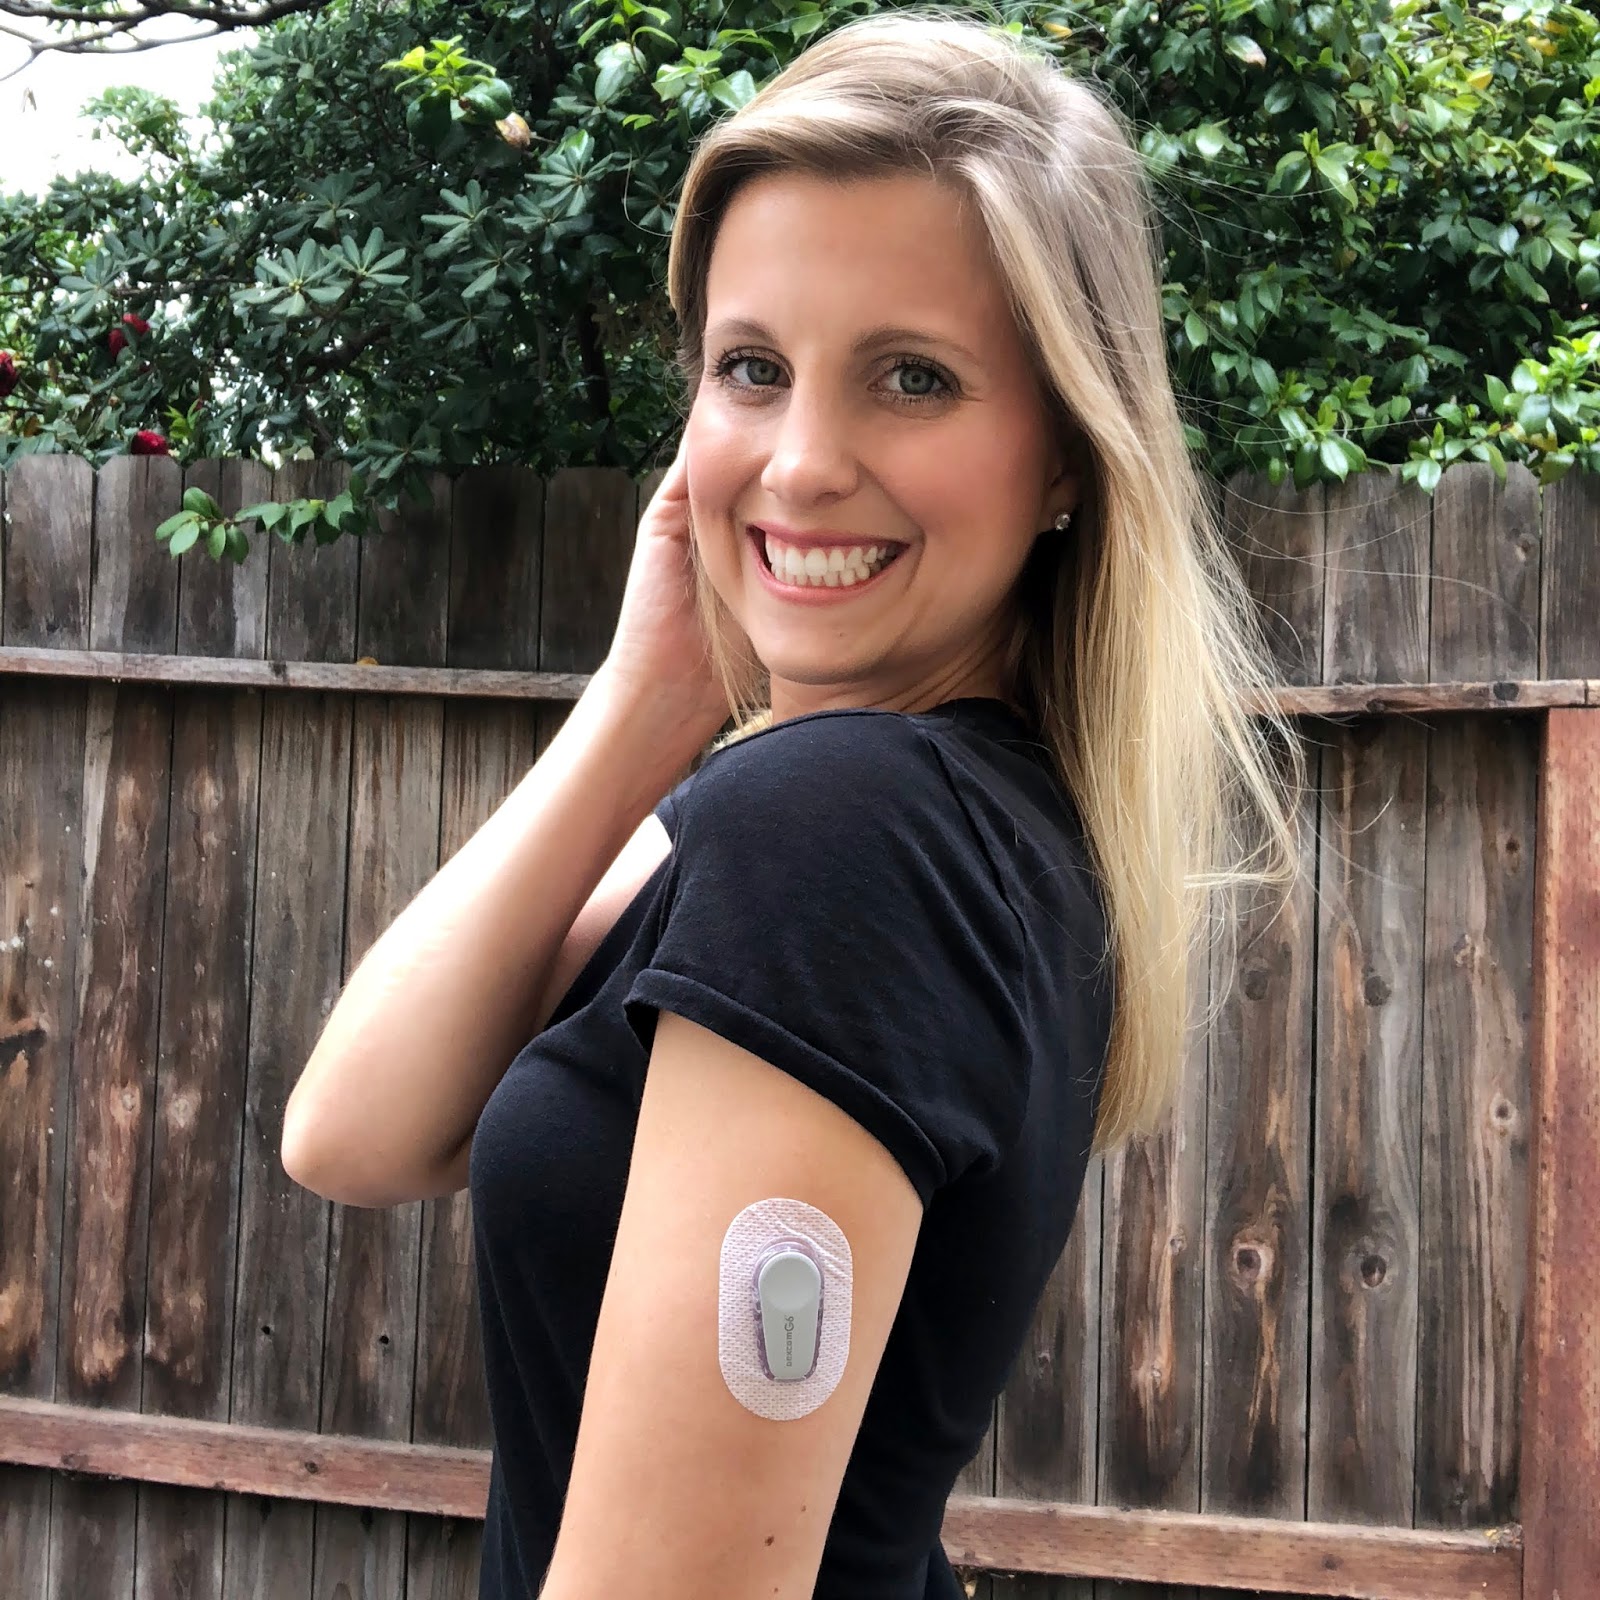 Dexcom G6: Review of the Continuous Glucose Monitor